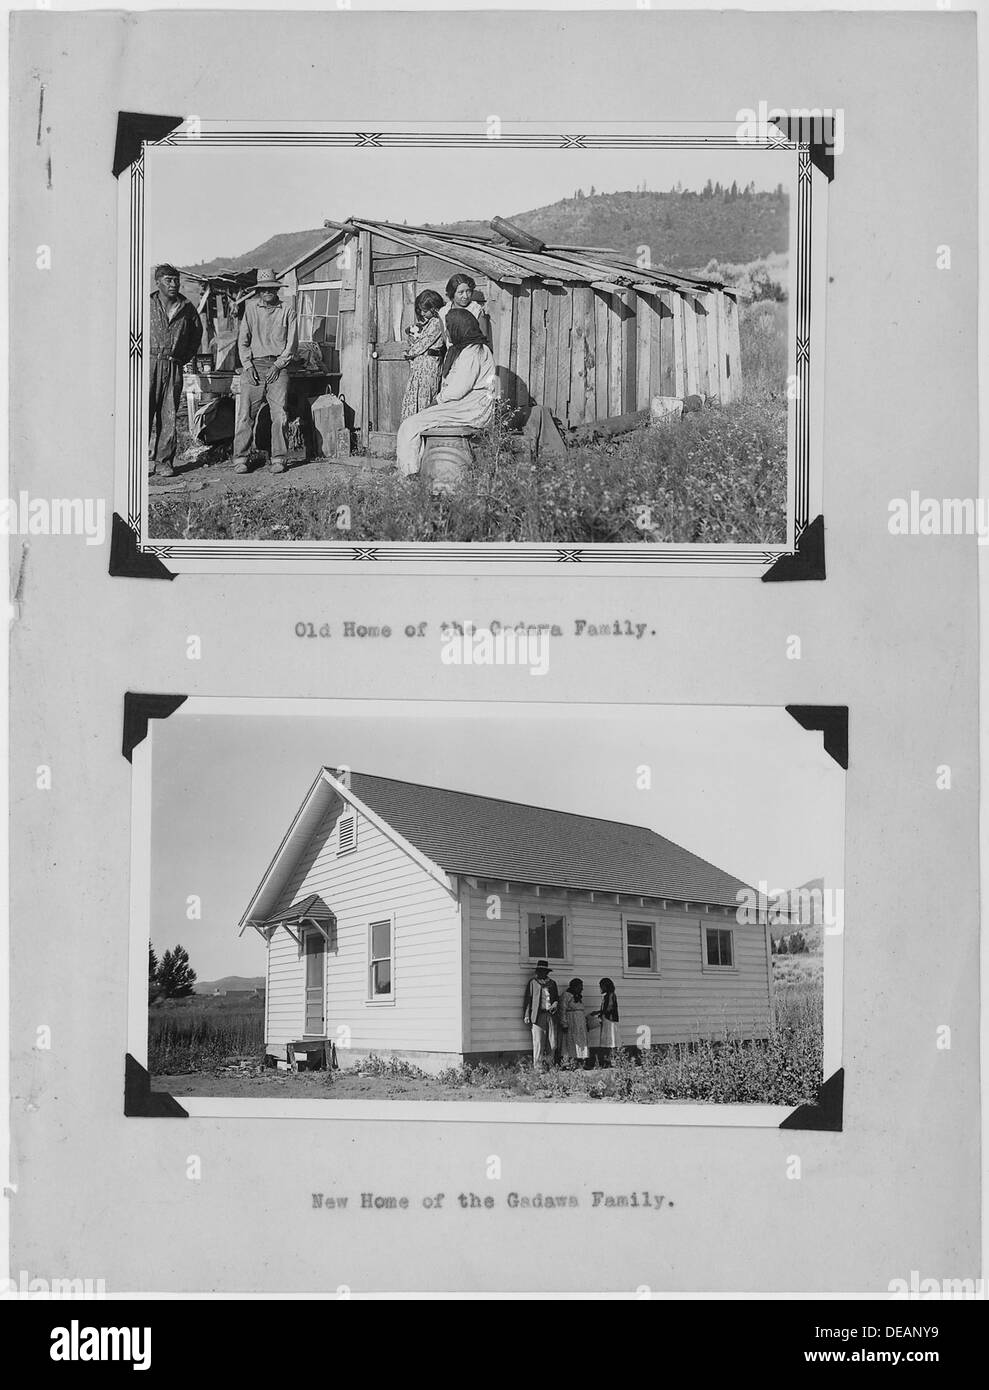 Photographs, with captions, showing old and new homes of the Gadawa Family, from The Annual Report of Extension 296325 Stock Photo